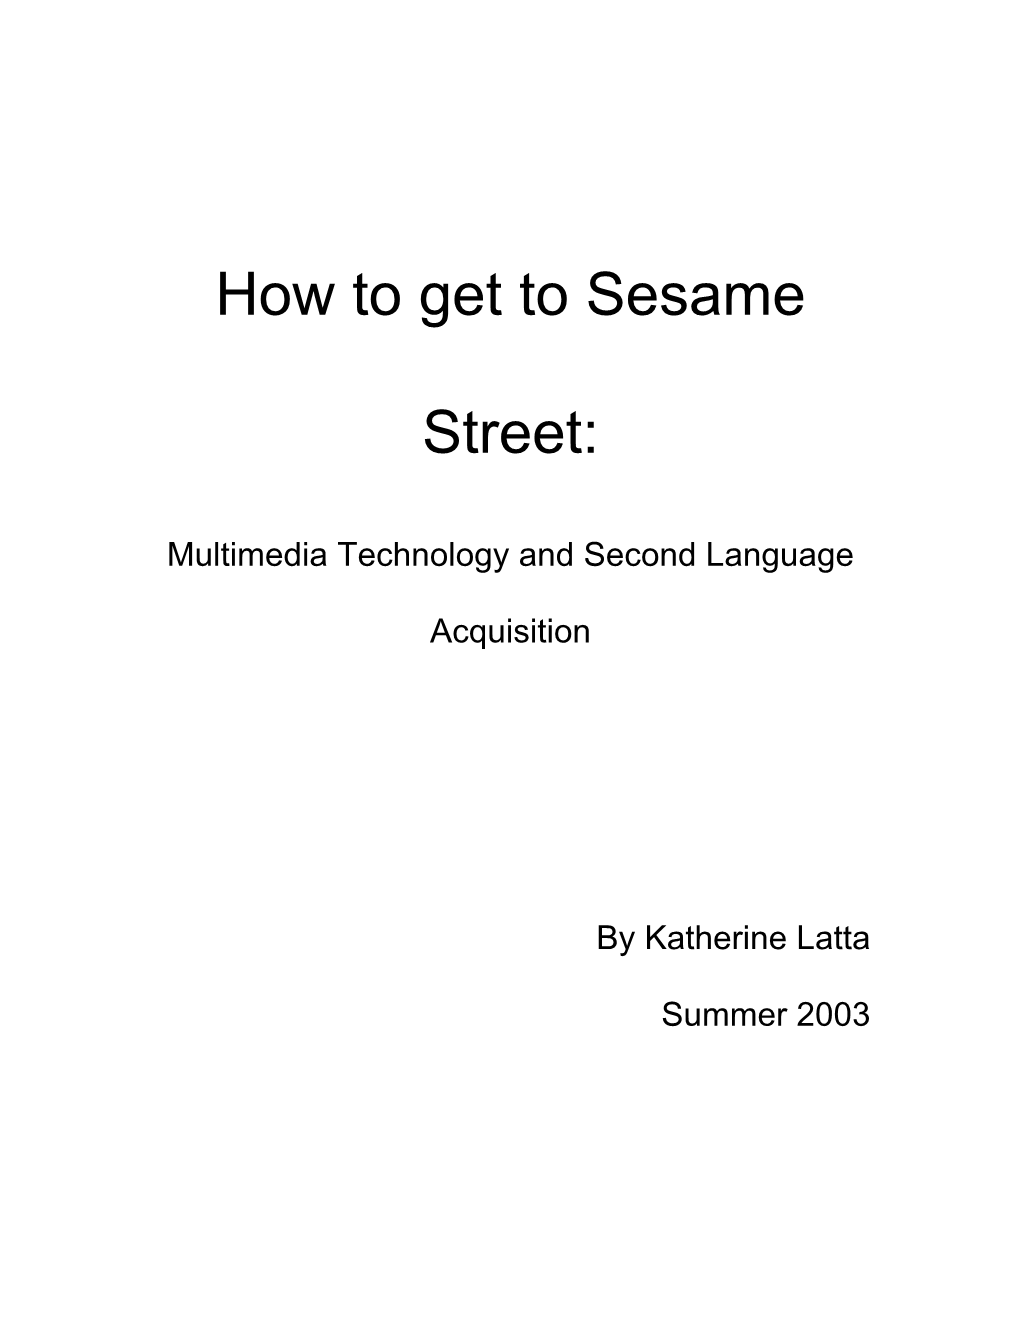 How to Get to Sesame Street